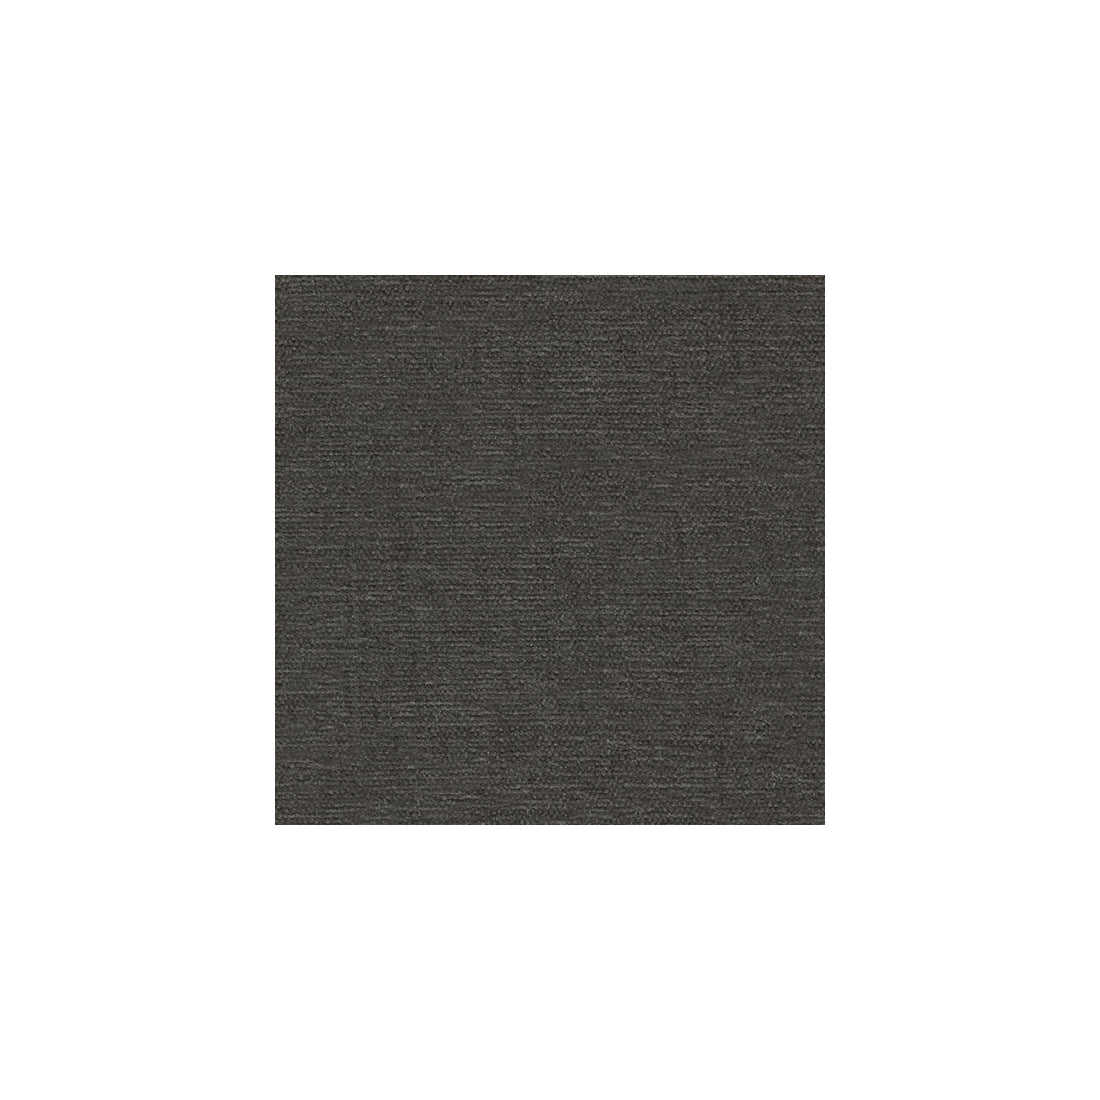 Stanton Chenille fabric in steel color - pattern 32148.811.0 - by Kravet Contract